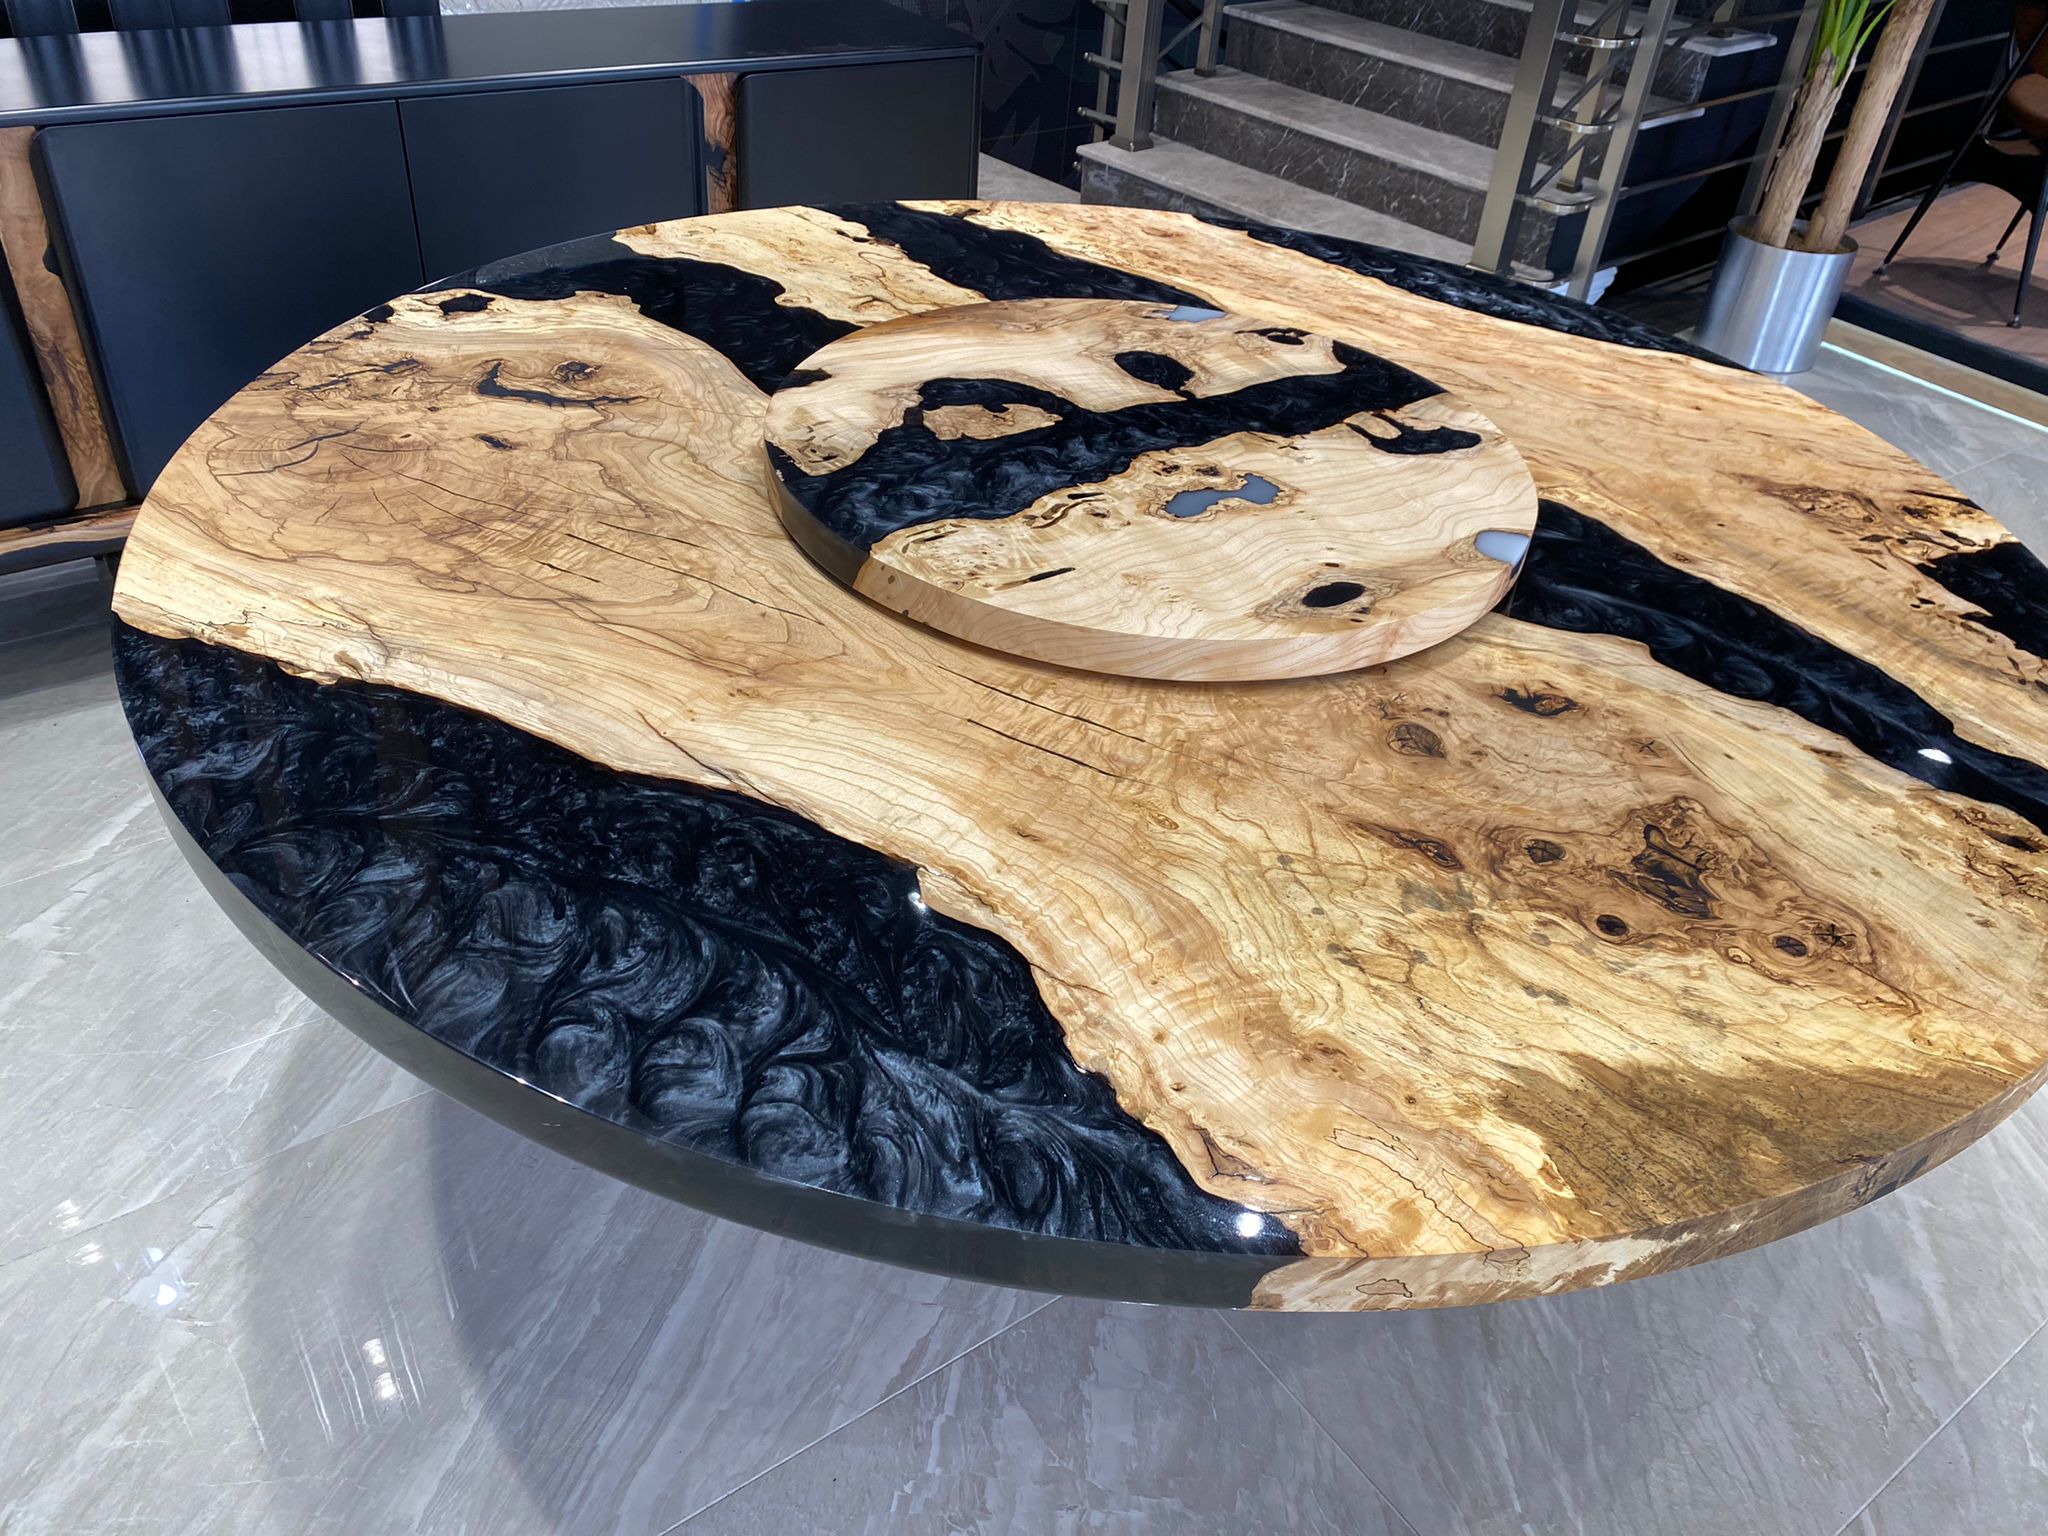 epoxy dining table, epoxy dining table austria, epoxy dining table ash, epoxy,epoxy river table, river table, river table epxoy, epoxy resin table, custom made furniture, exclusive tables, epoxy table, johannes forkl, forkl, oh my deer, omd, epoxy resin table buy, epoxy resin table buy austria, epoxy tables, epoxy tables, epoxy resin table river, epoxy resin dining table, epoxy resin table ash wood